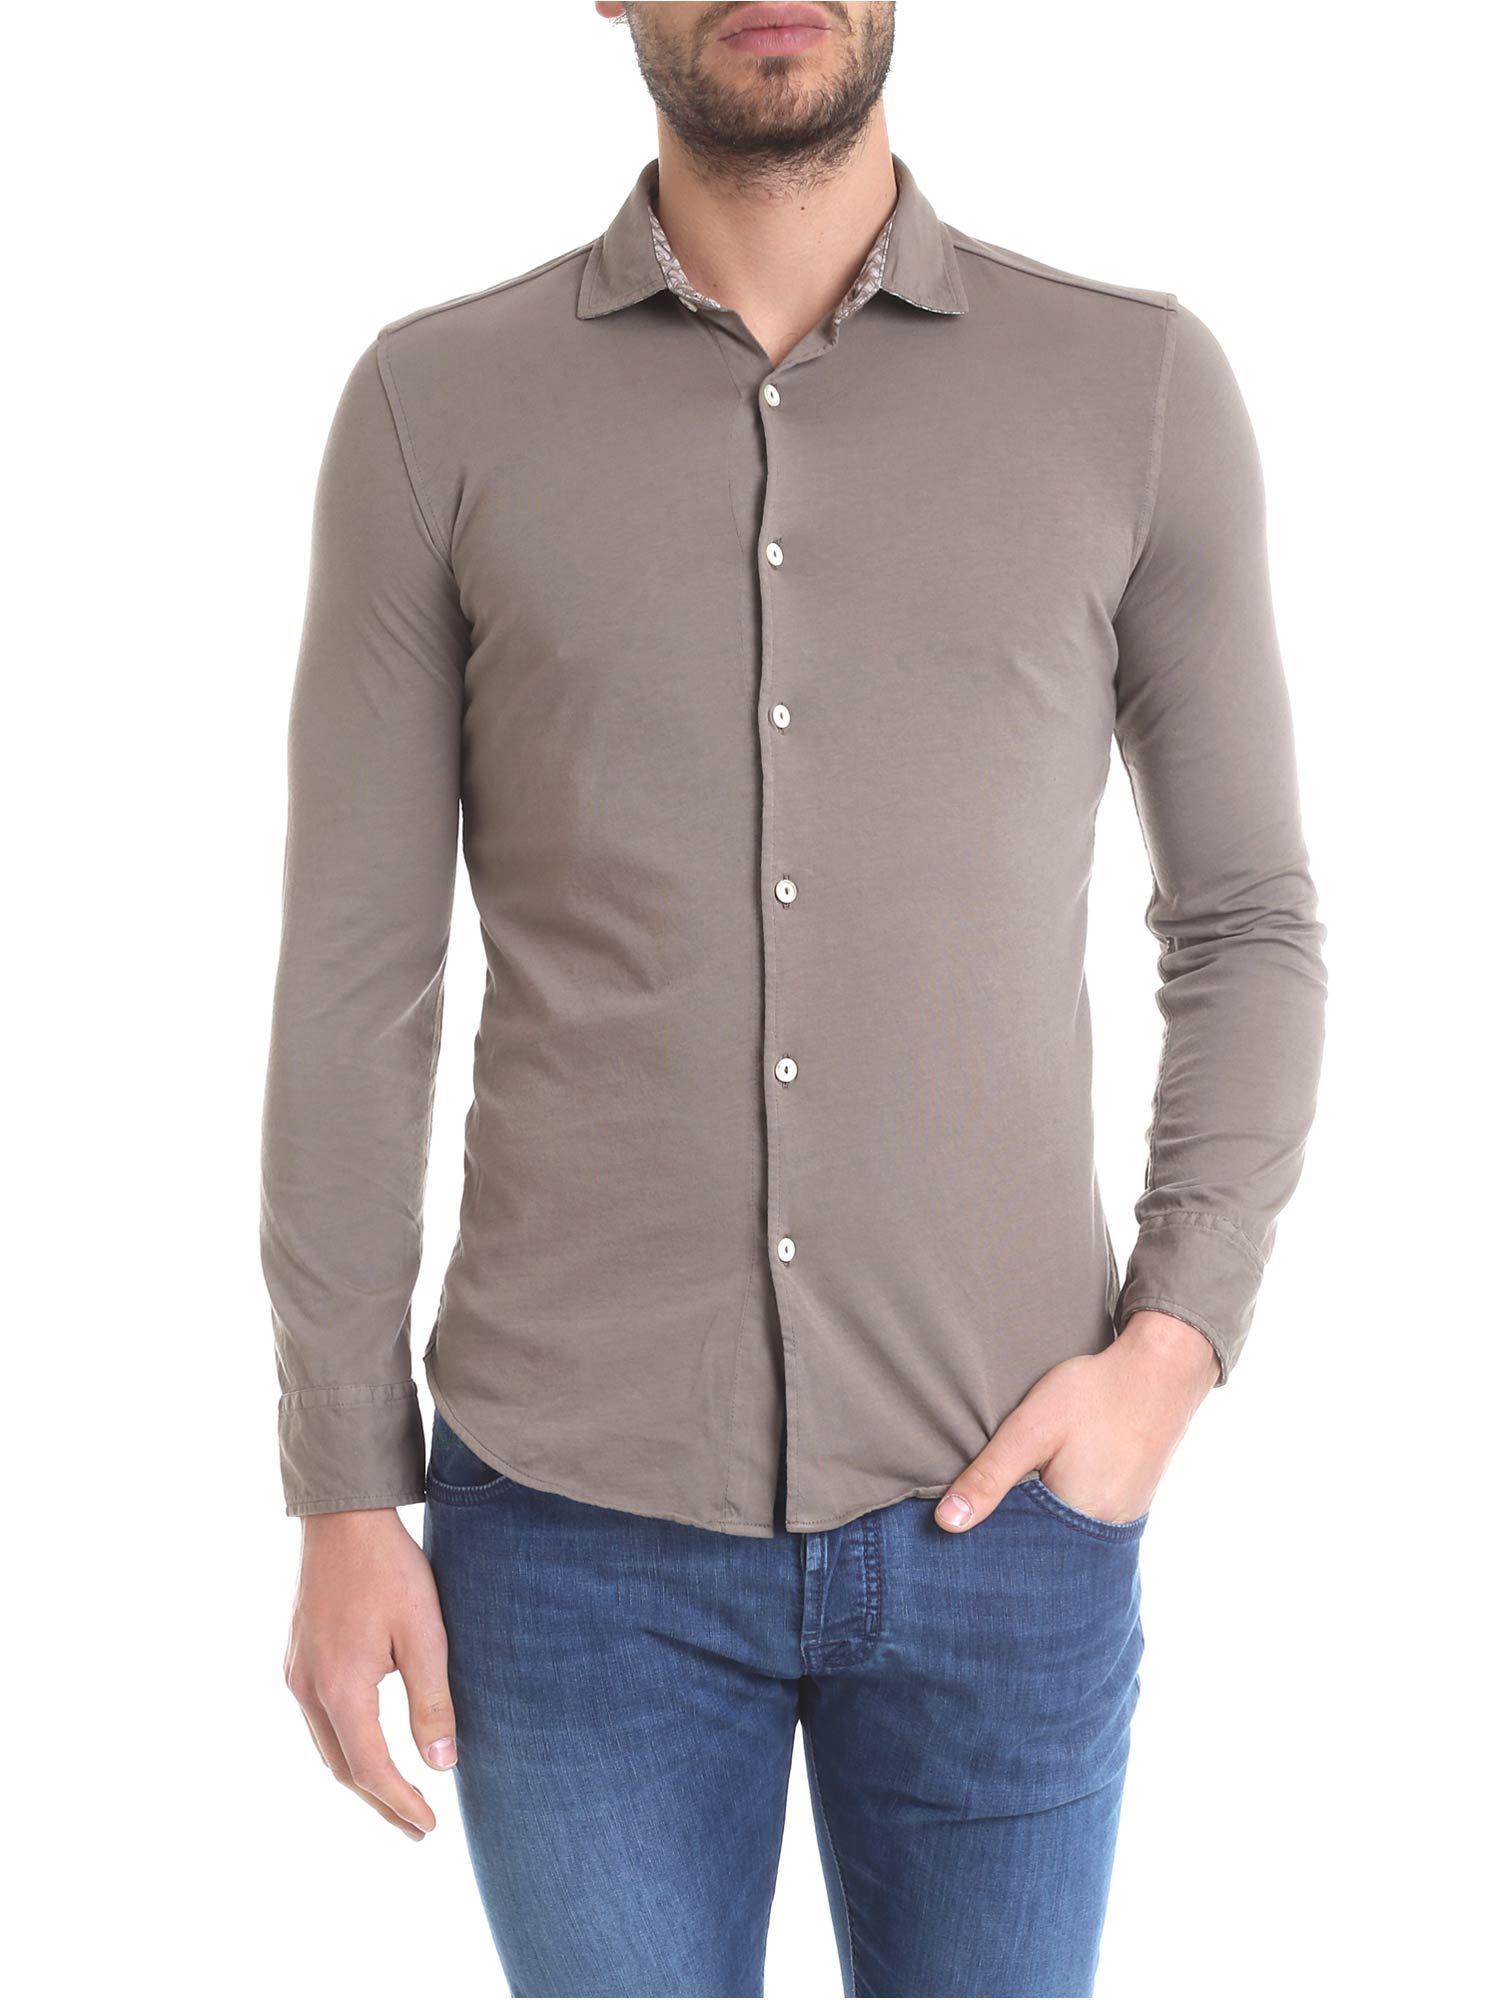 Drumohr Biscottino Shirt In Taupe Color in Brown for Men - Save 1% - Lyst